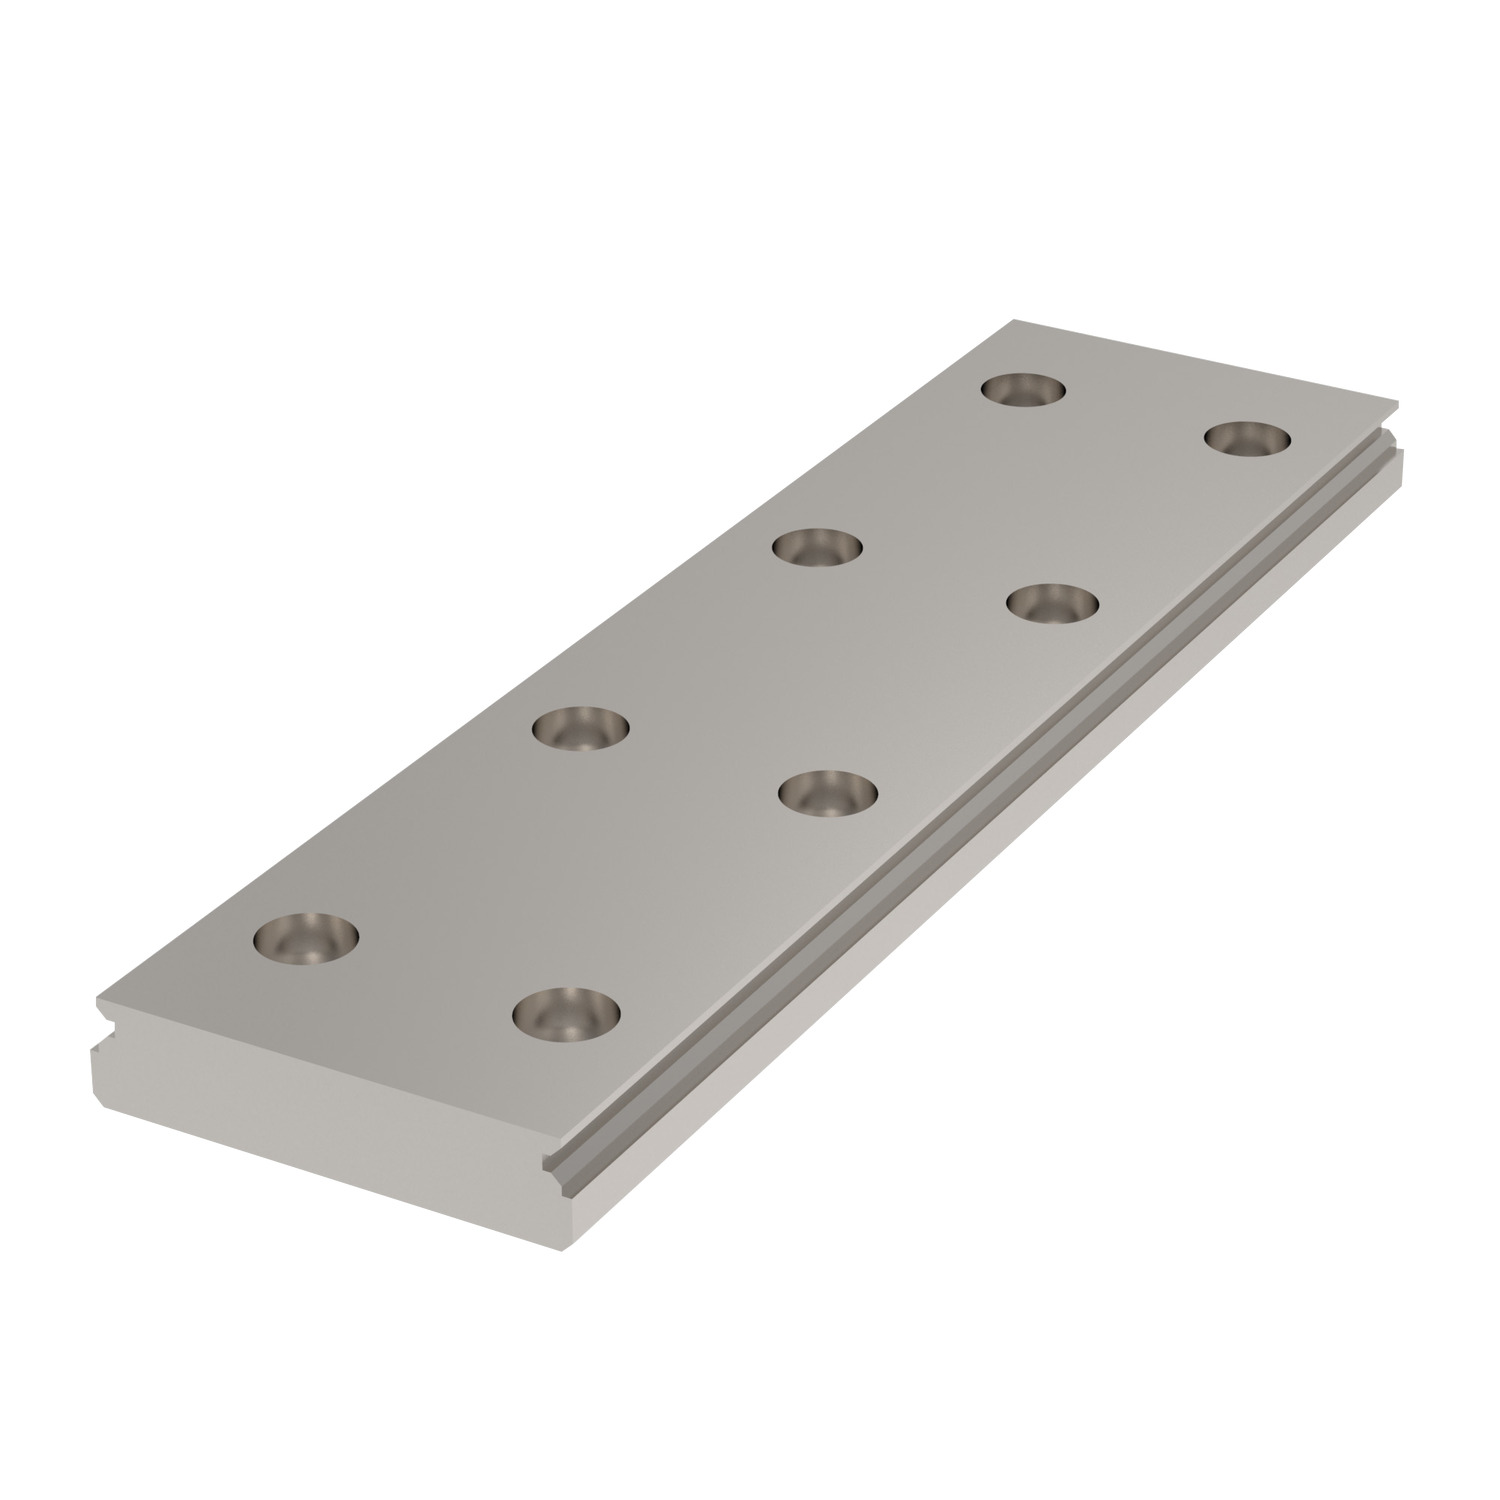 42mm Miniature Linear Rail Corrosion resistant stainless steel body. Other rail sizes available on request. Ideal for applications such as aerospace where space efficiency is a priority.